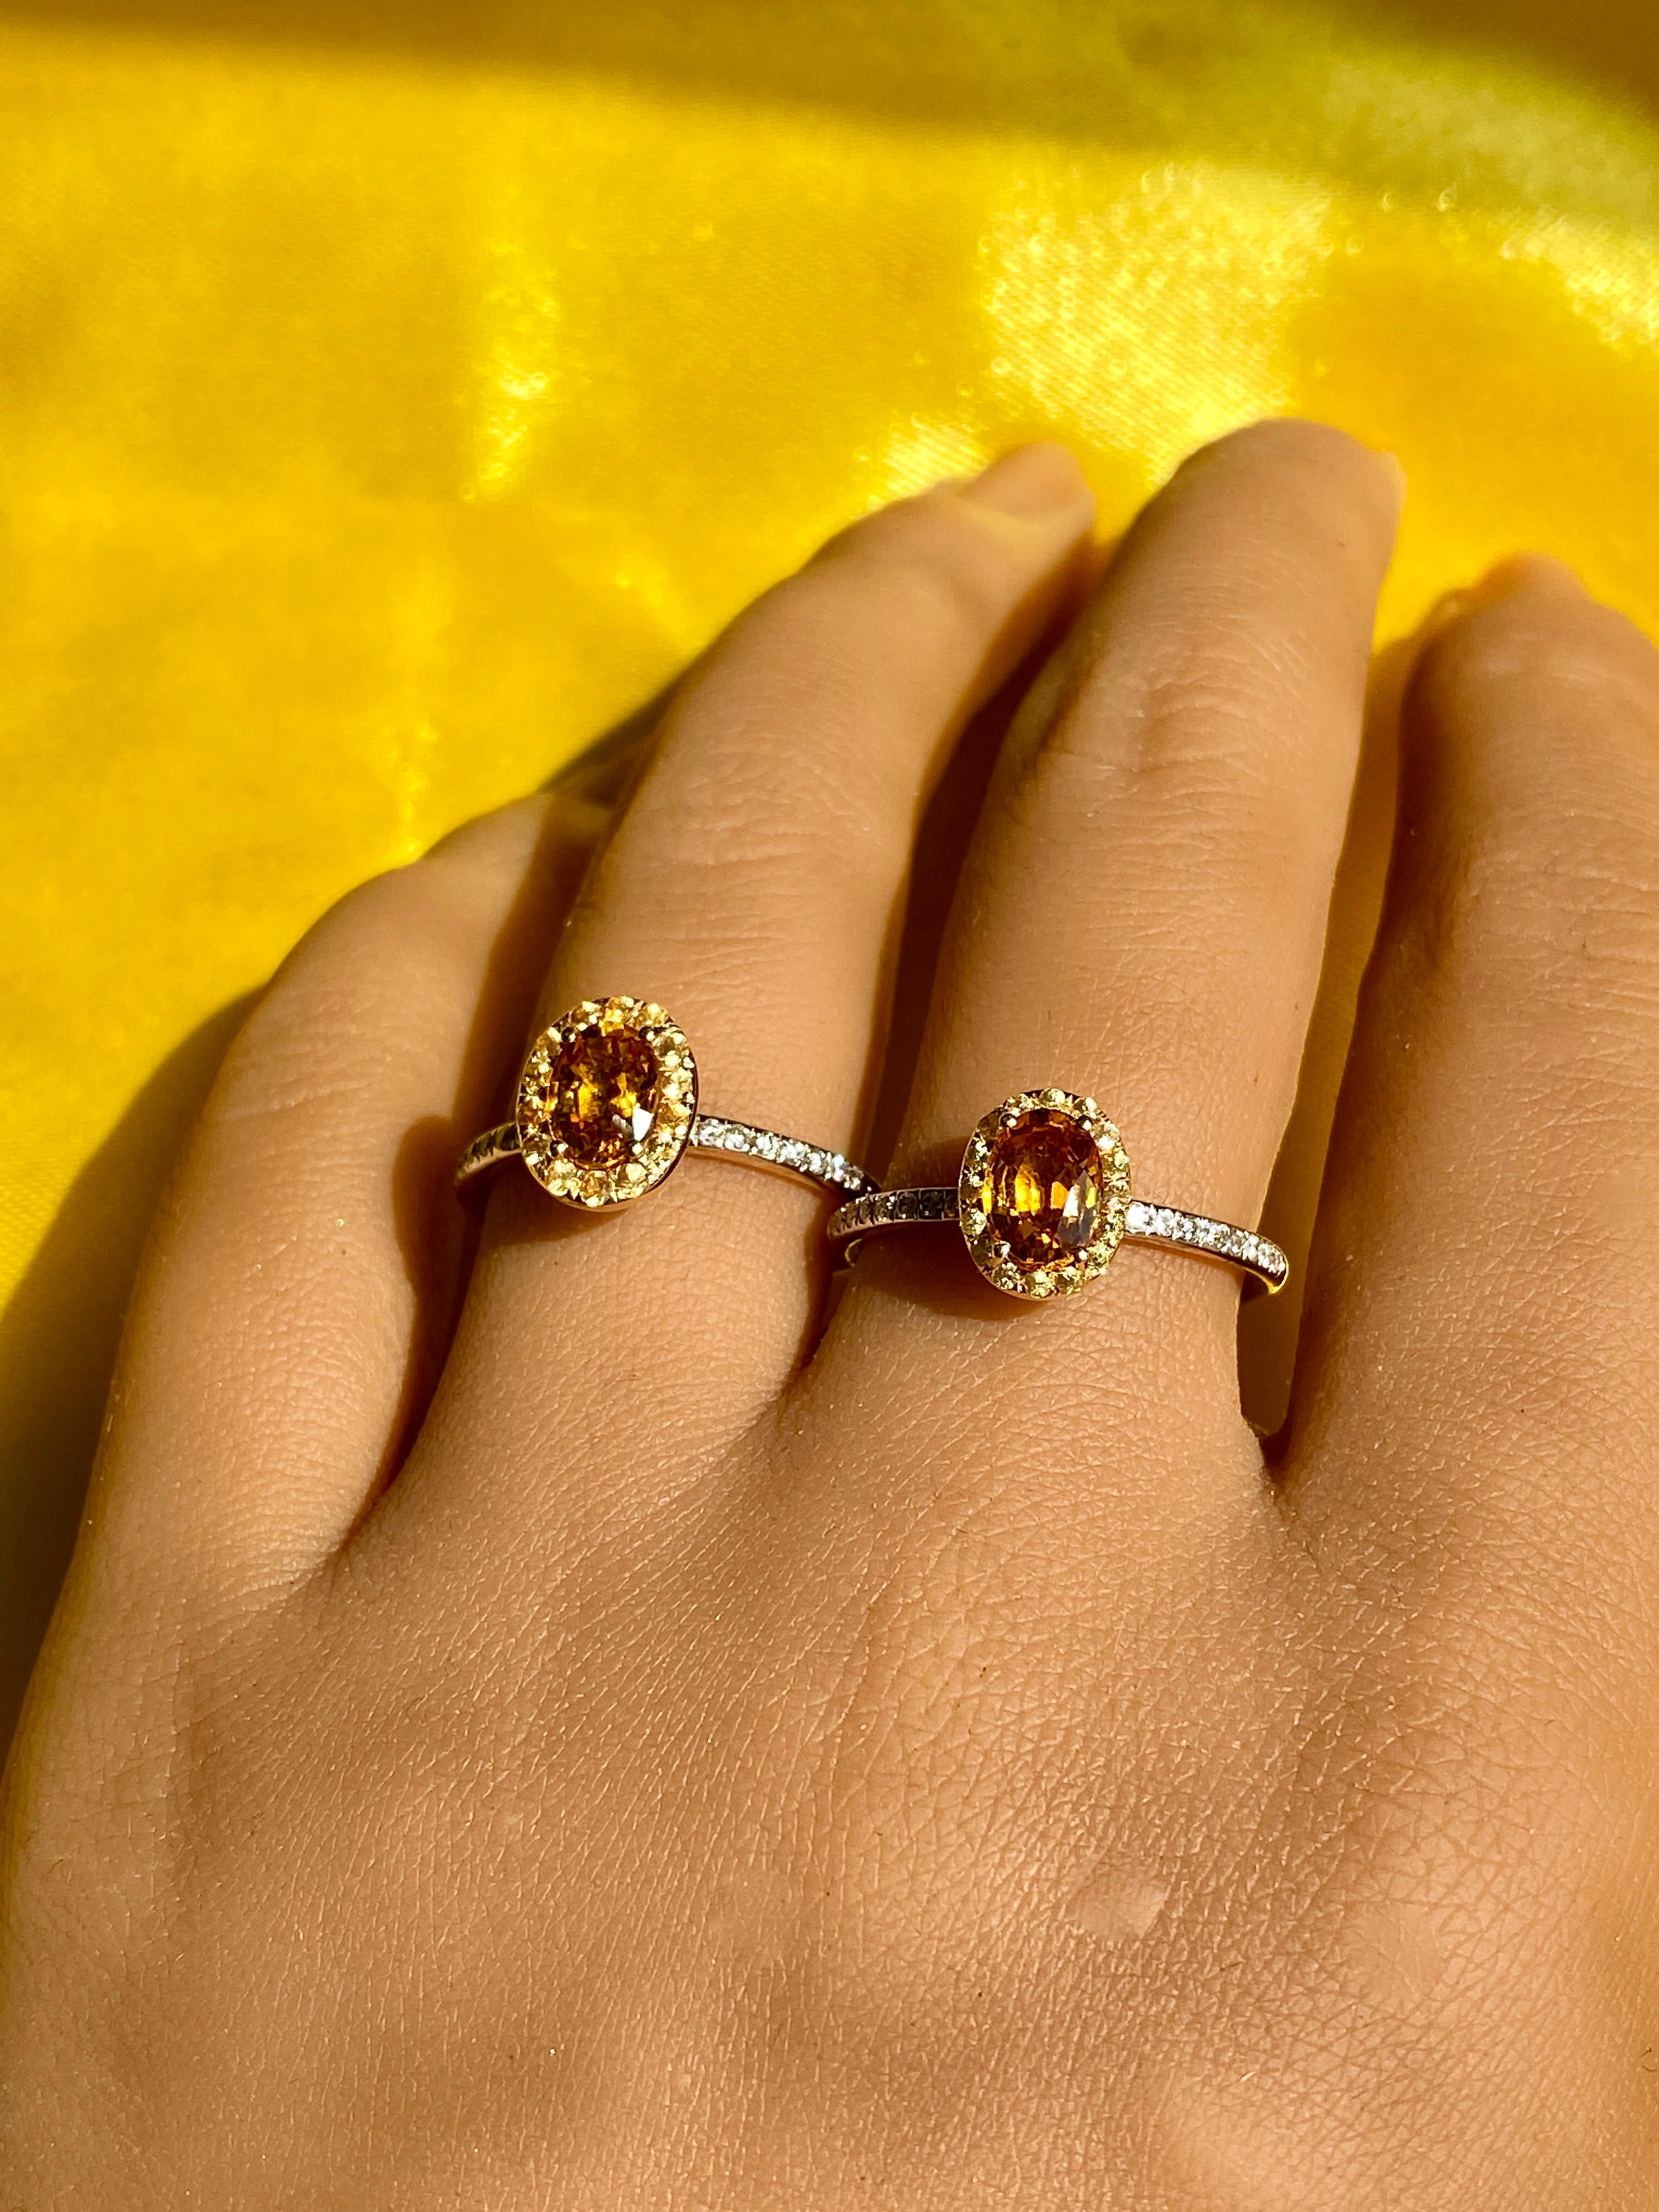 Our most loved design! The yellow and orange sapphire rings are perfect for the sun kissed days that lie ahead of us! Diamonds on the shank, sapphires in the center and on the halo, be ready for your beach day photoshoot with these rings!